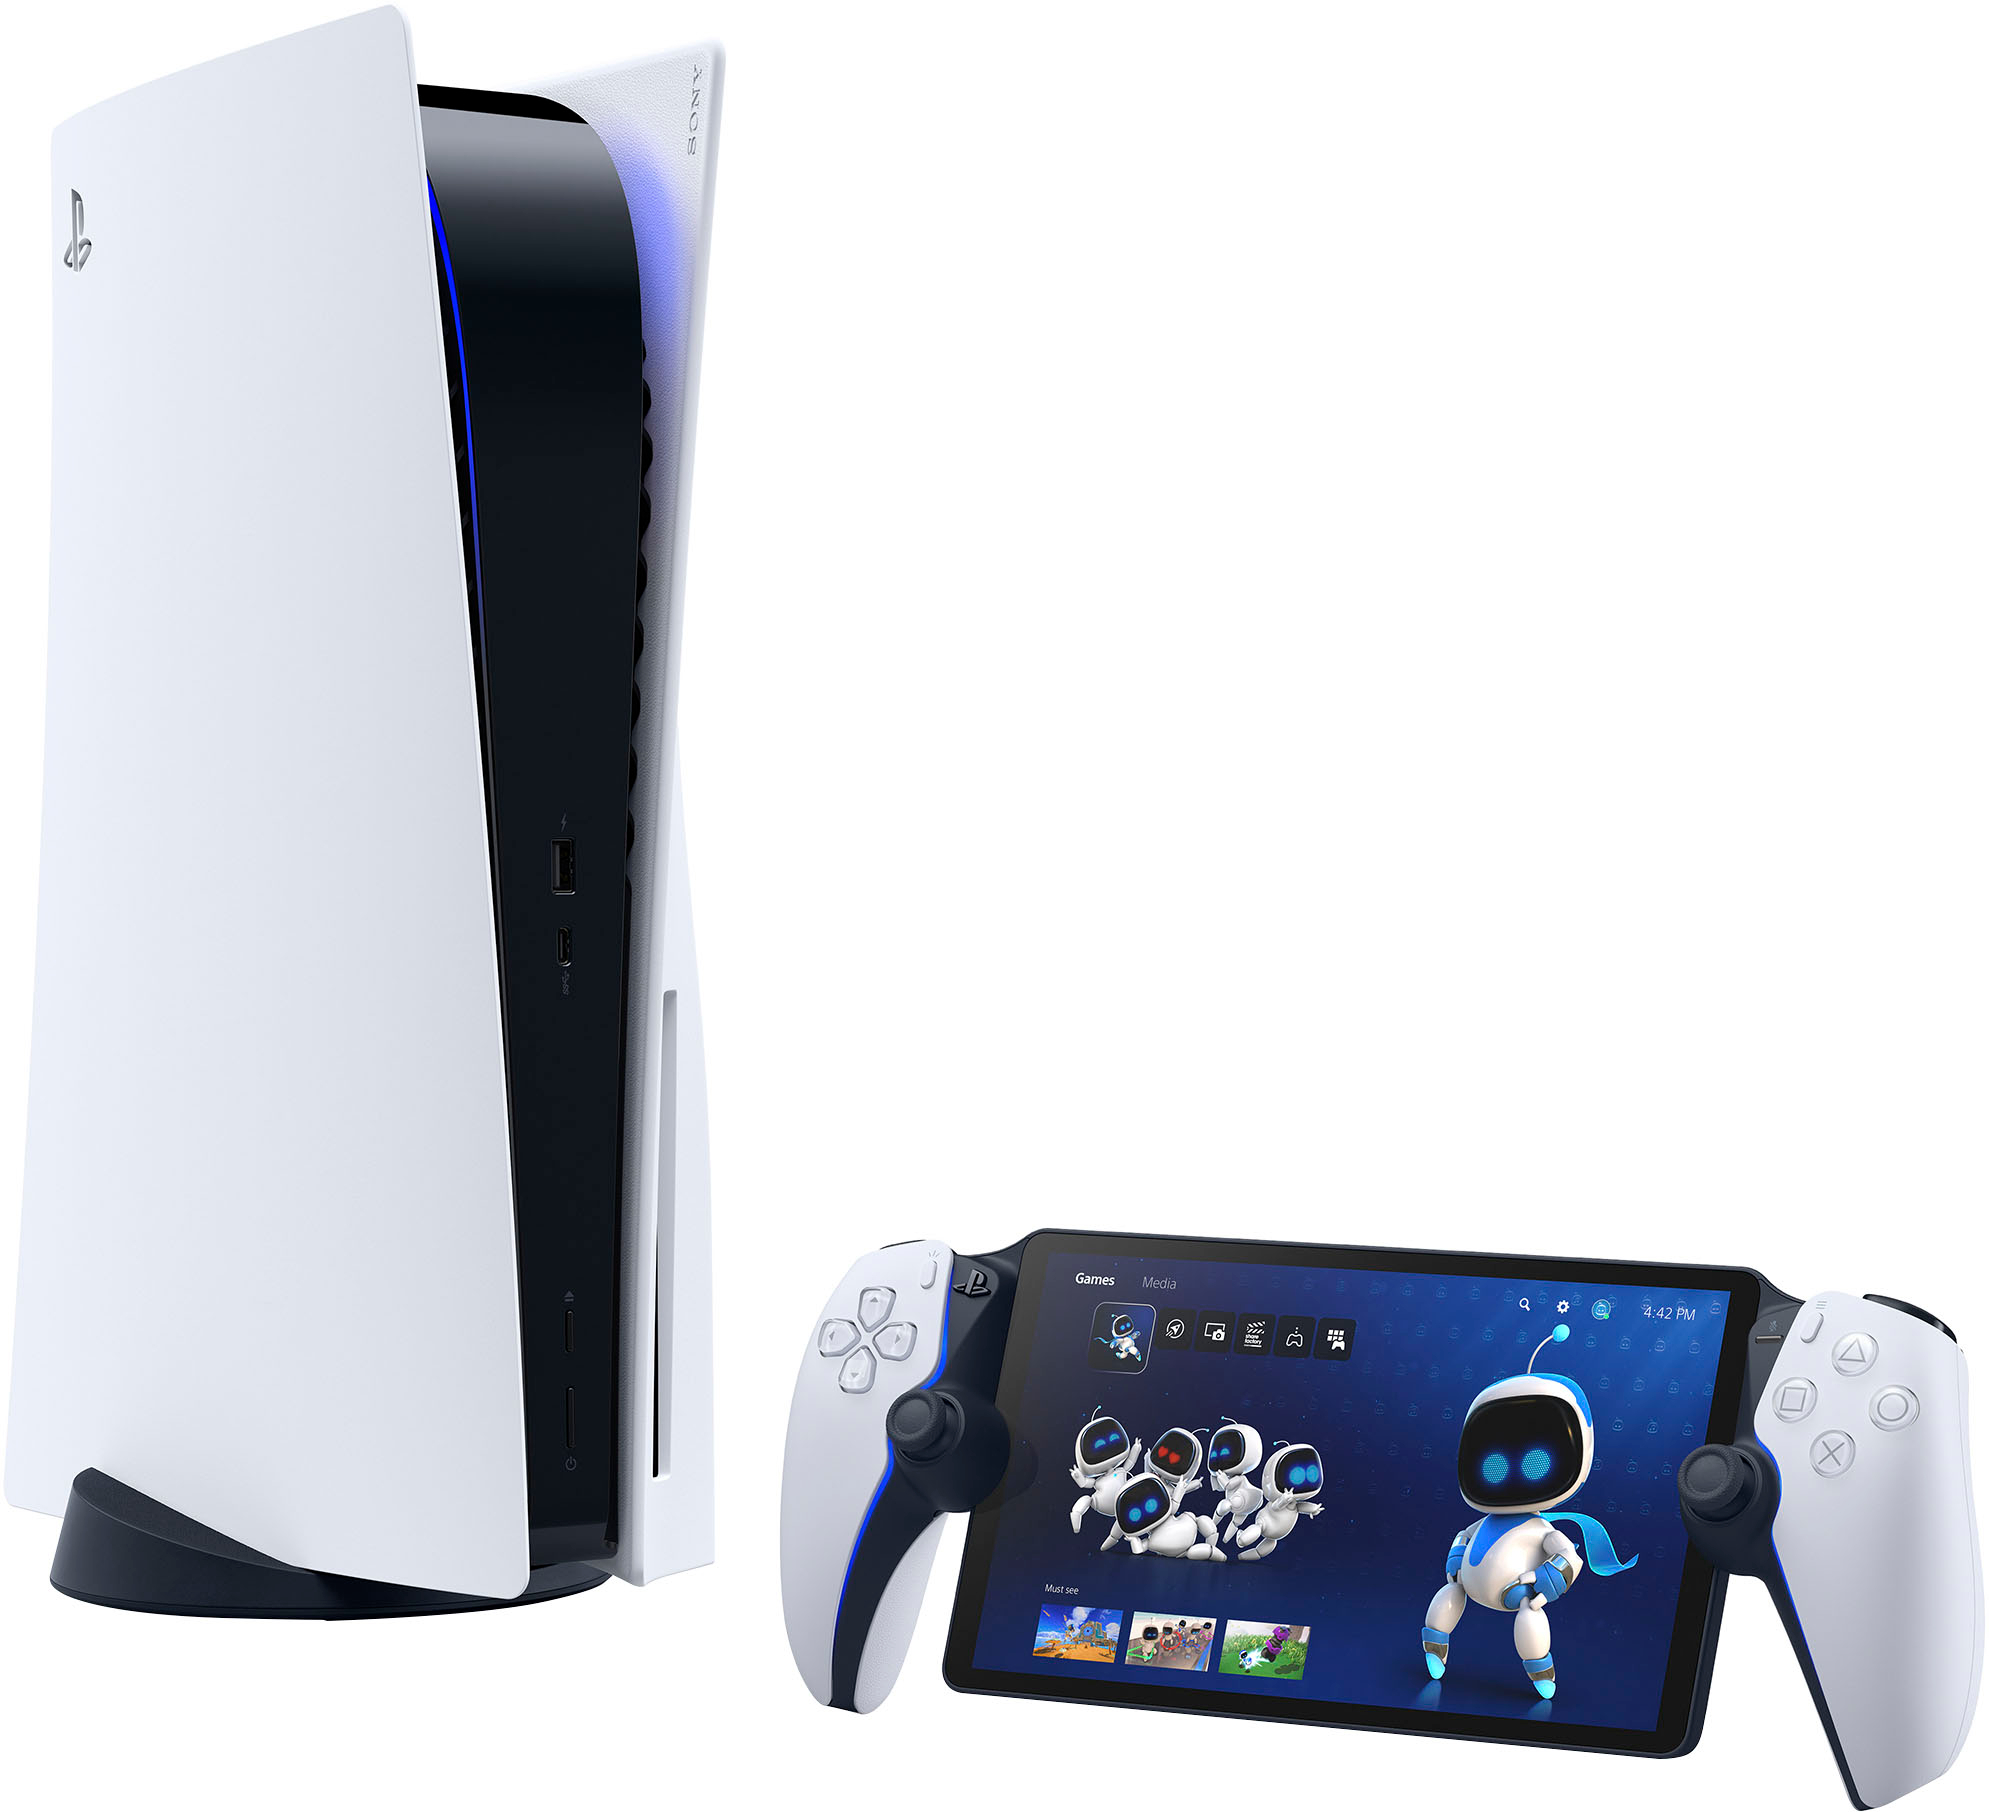 PlayStation Portal: Price, specs, and release date